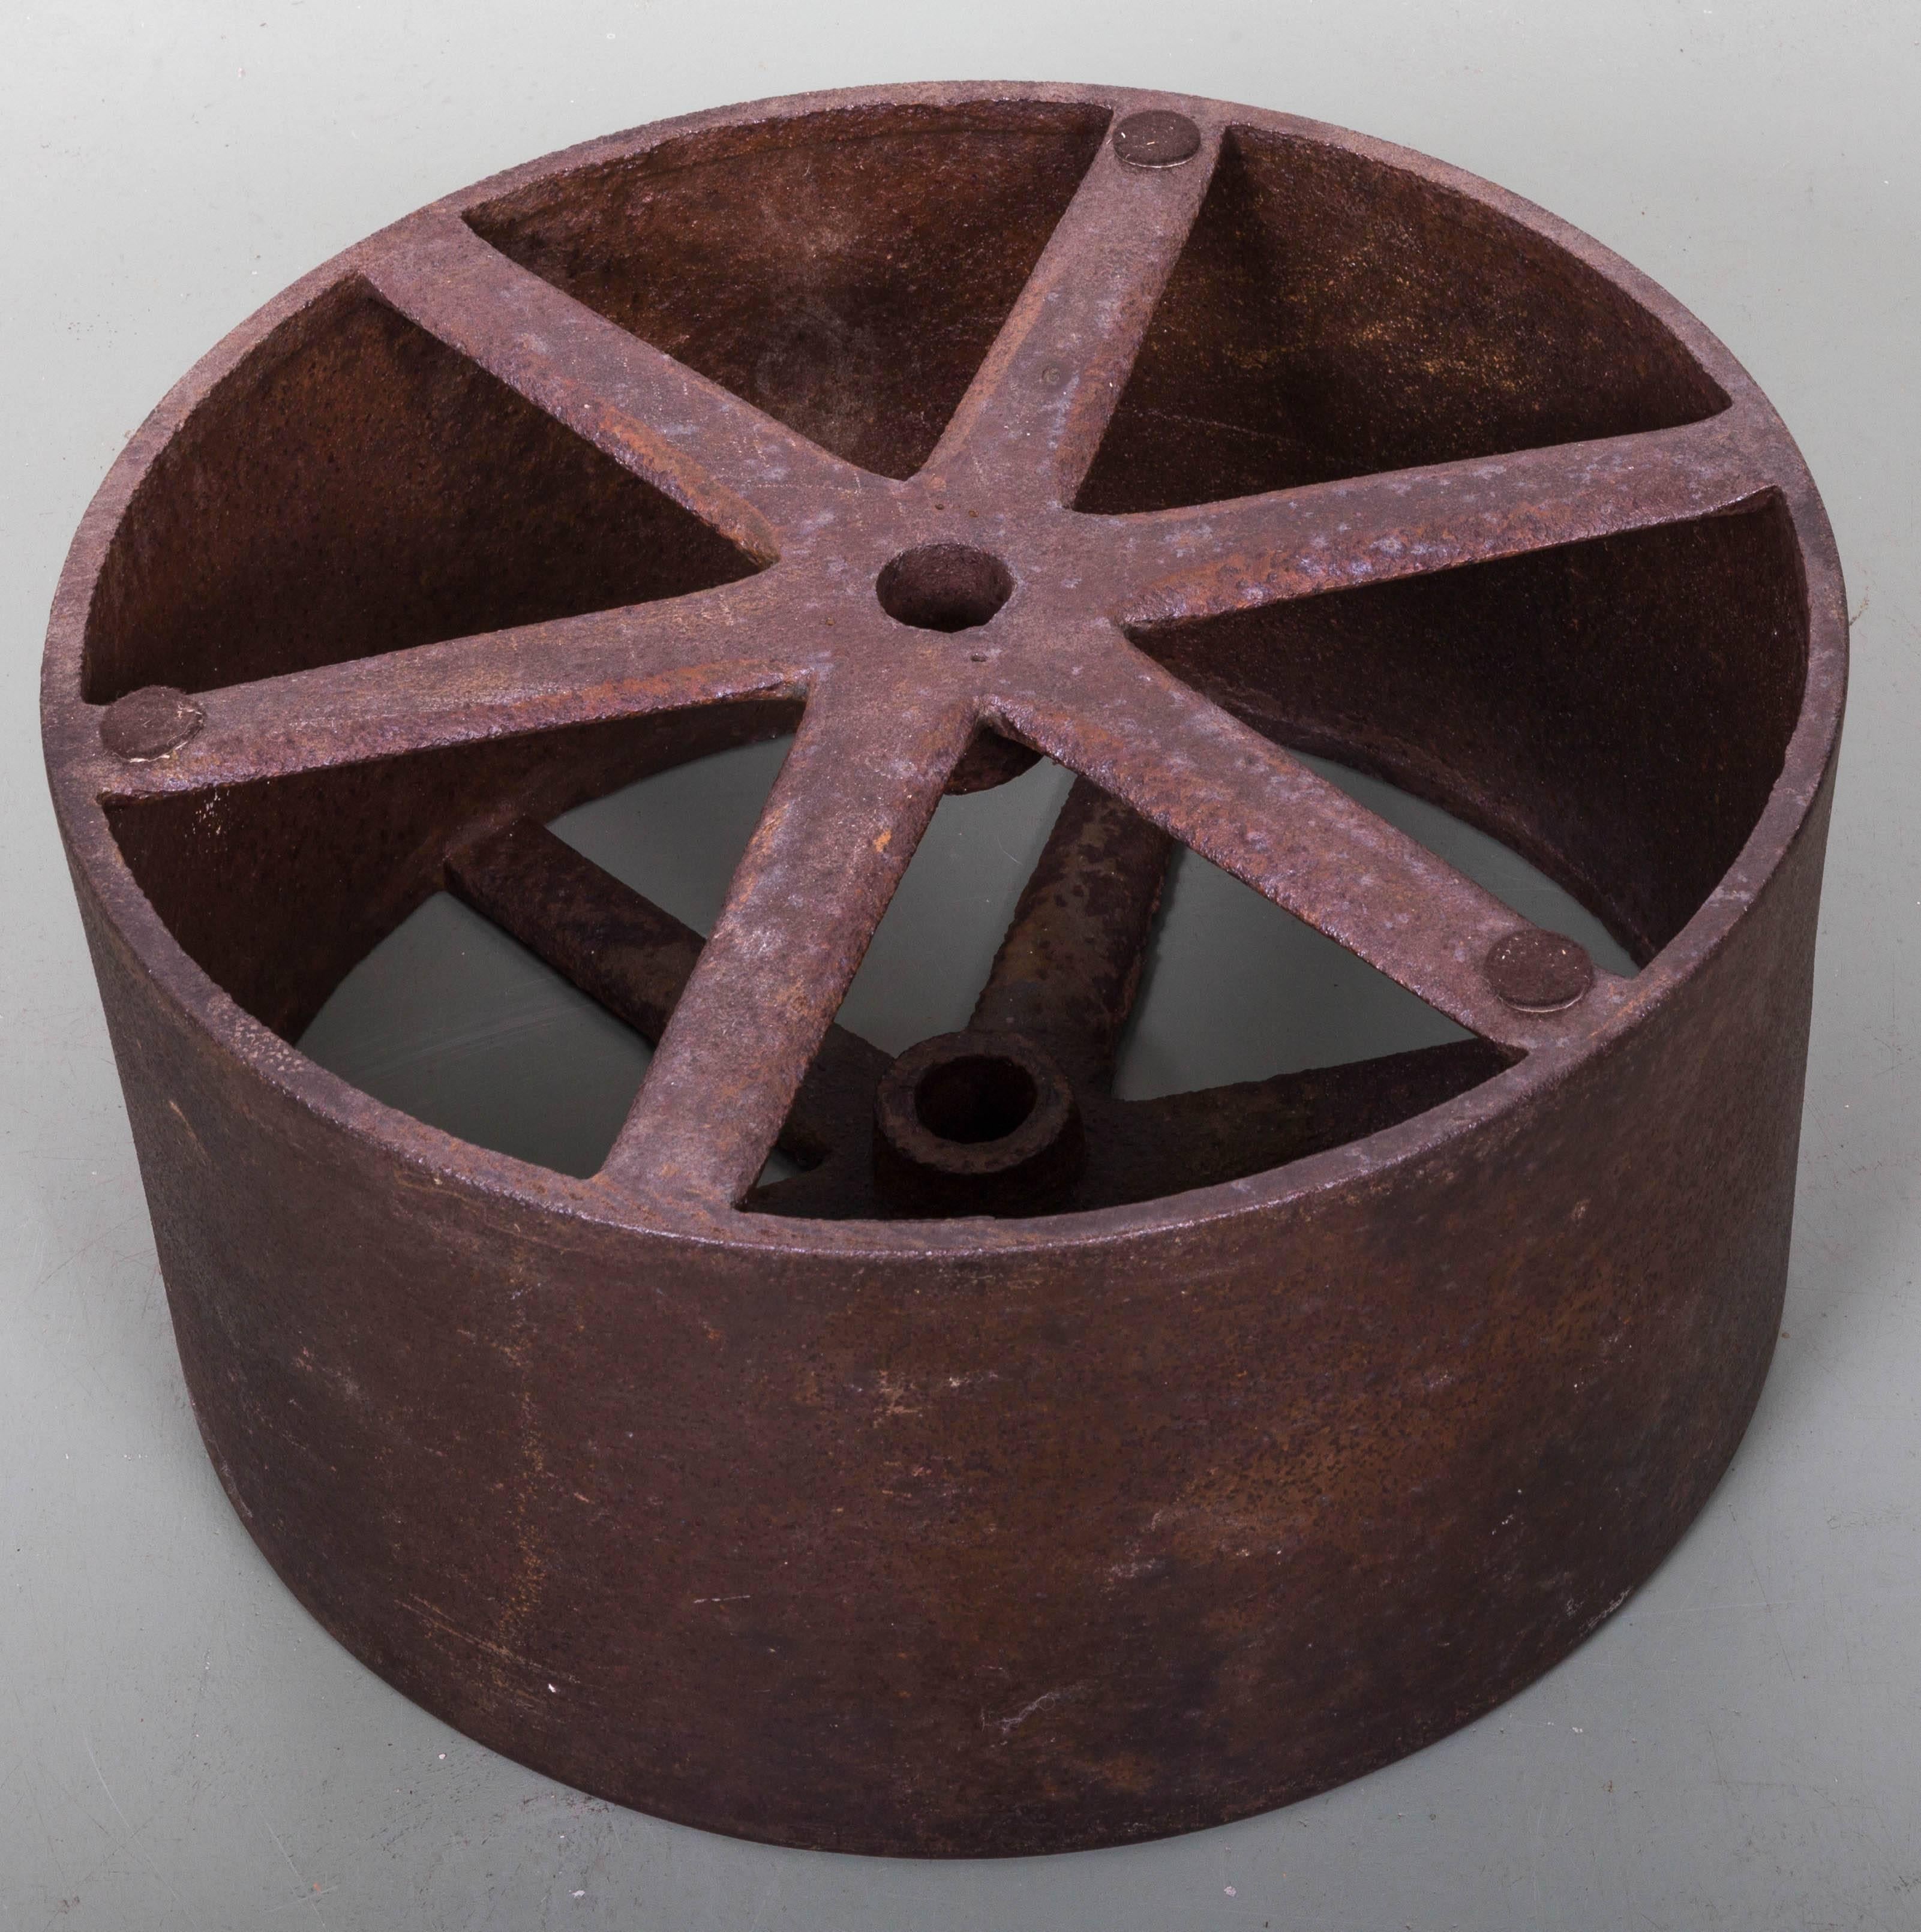 Six triangular shaped spokes radiating from centre axel hole, banded by solid steel. Measurements of wheel 23